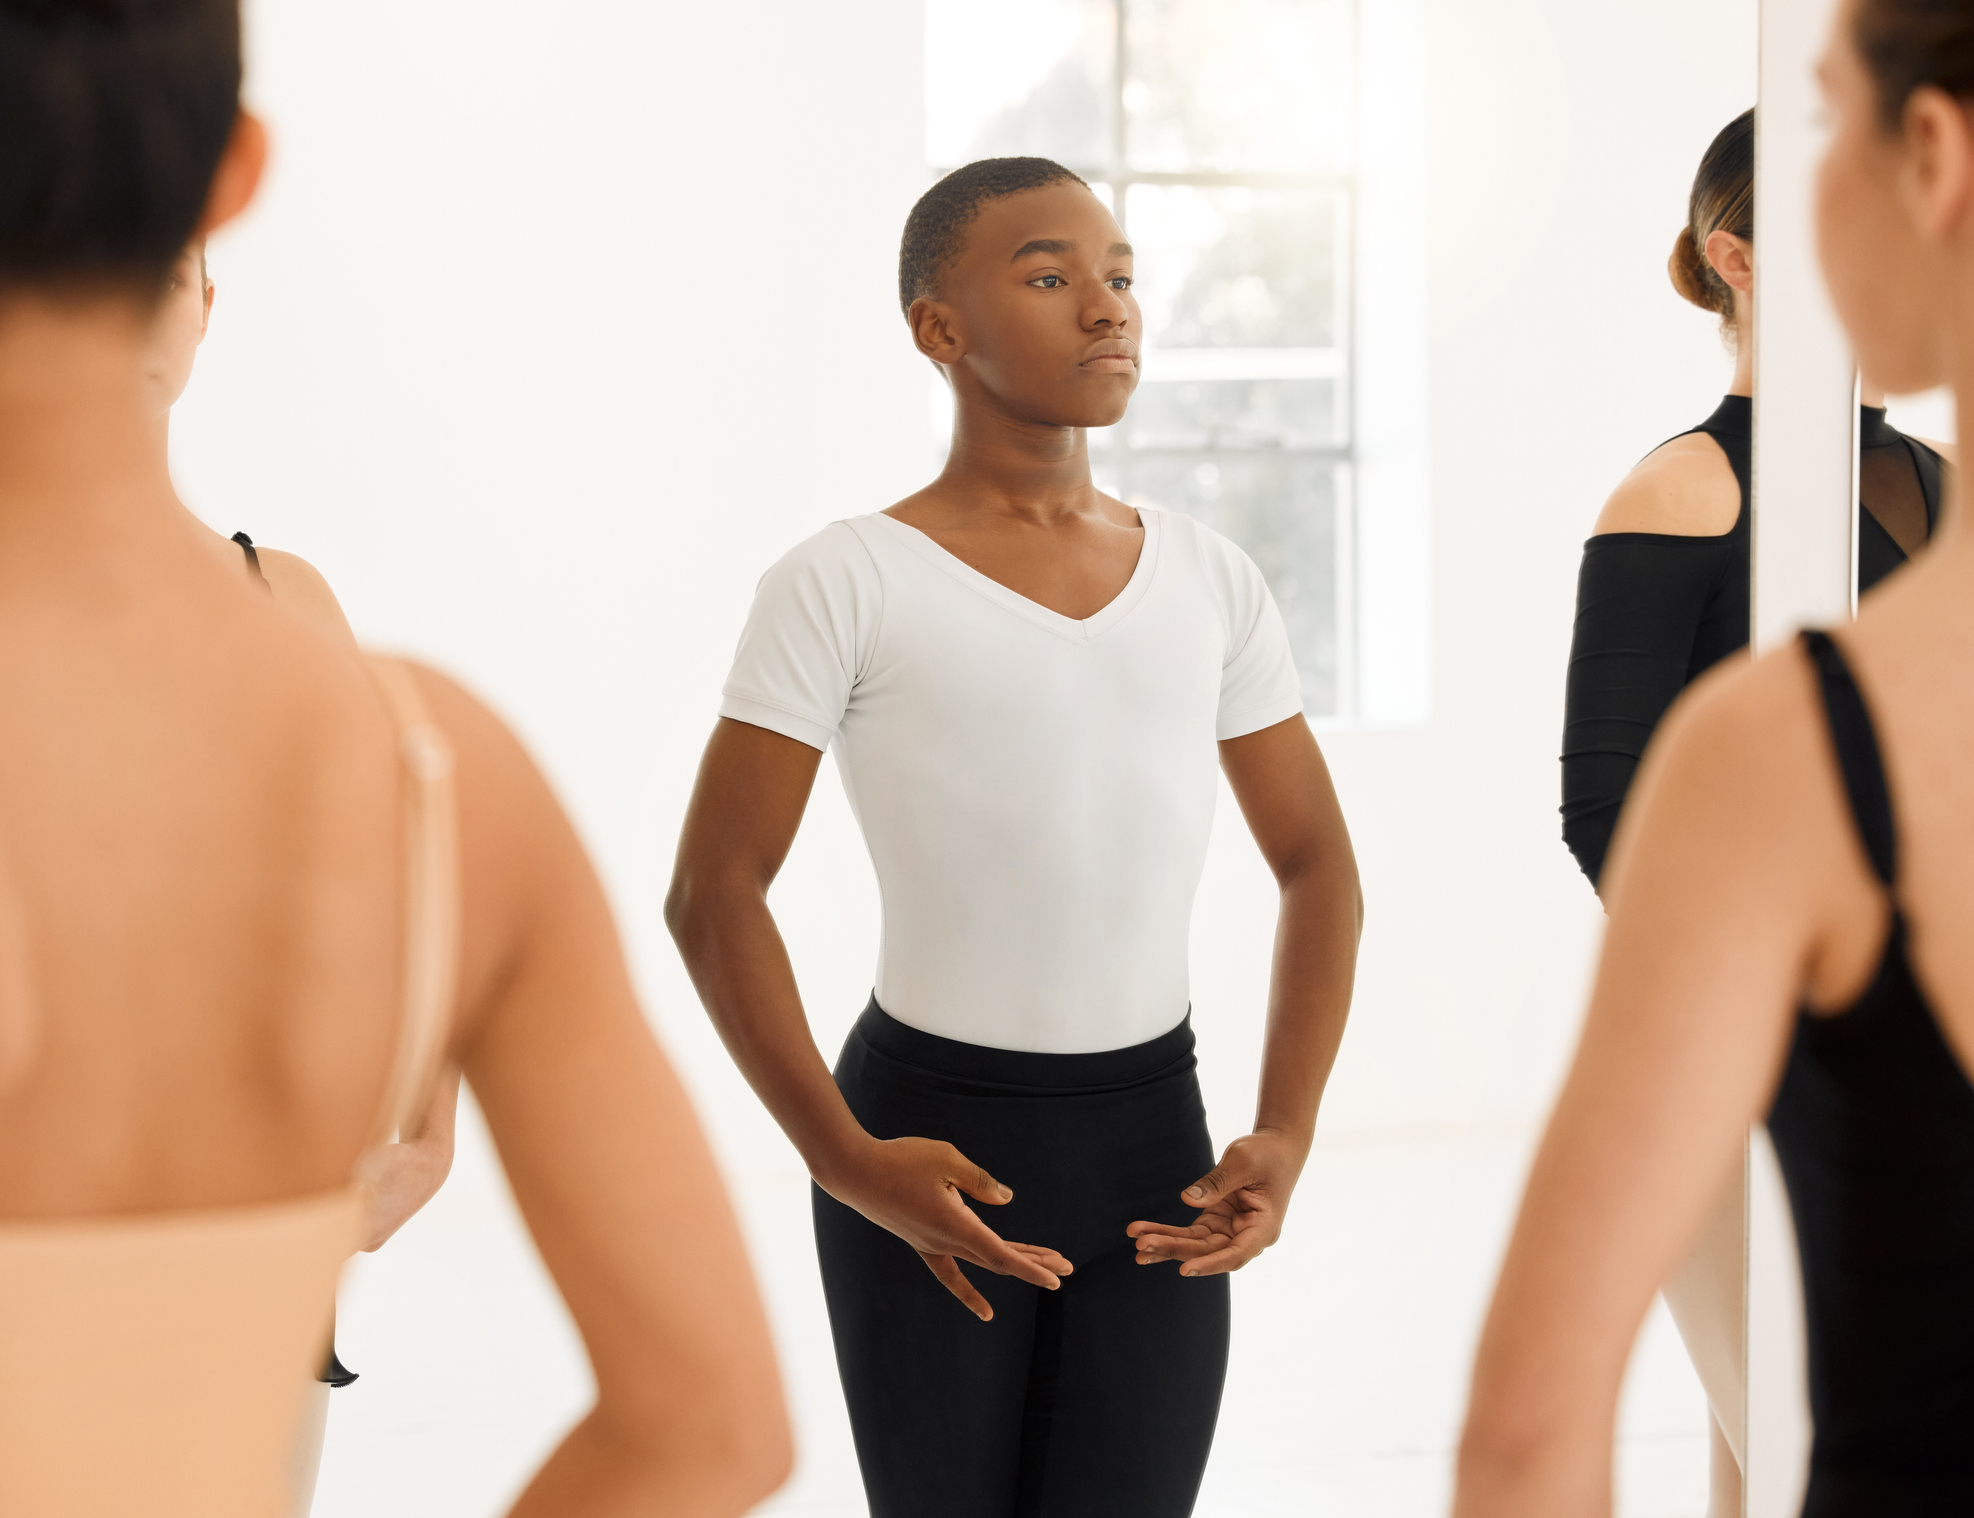 A teenage male ballet student is shown from the knees up in a large, brightly lit dance studio. He stands in fifth position with his arms en bas, and wears a white V-neck T-shirt and black tights. He looks into the mirror with focus.